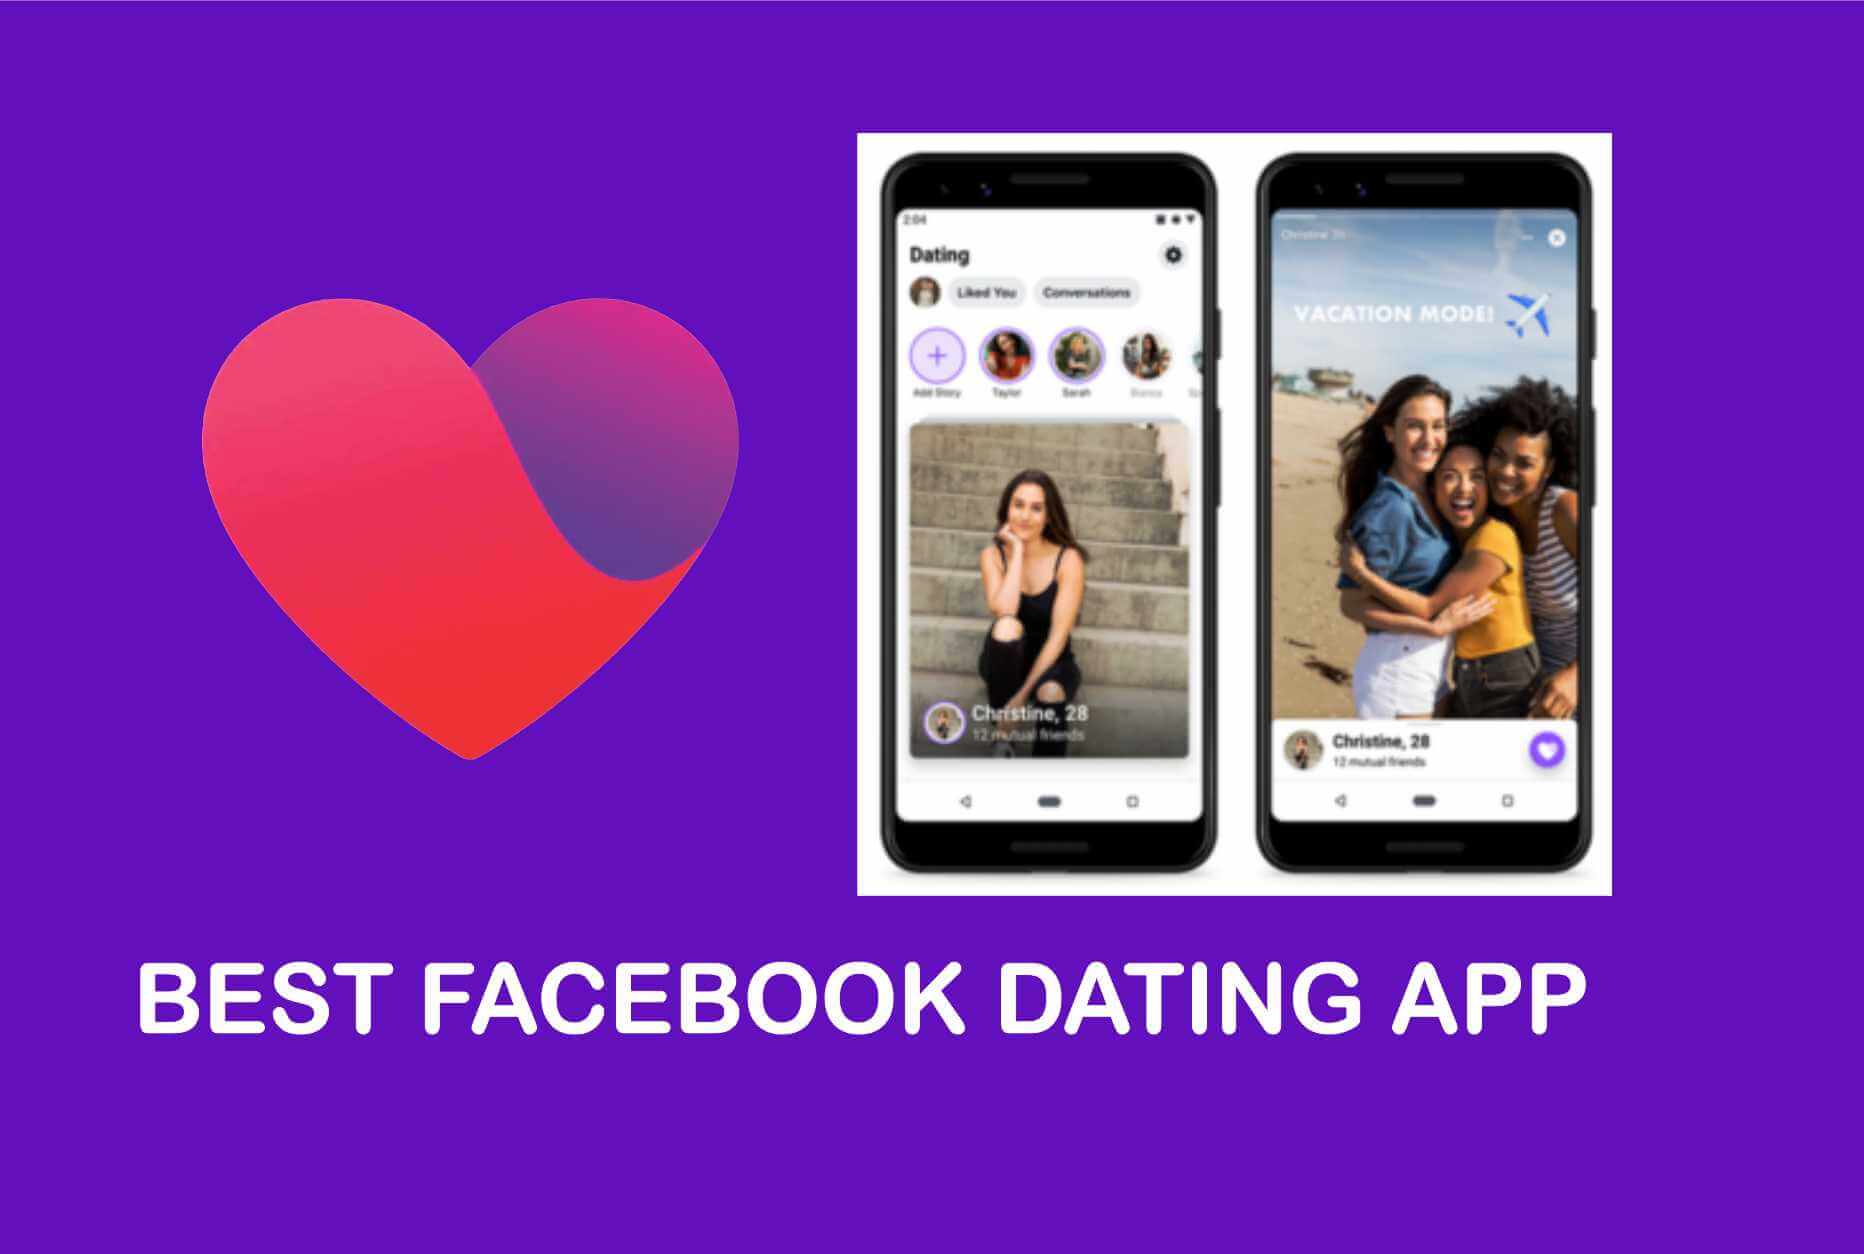 Facebook's Latest Dating App Has Failed Miserably - I Played With It For a Week To See Why